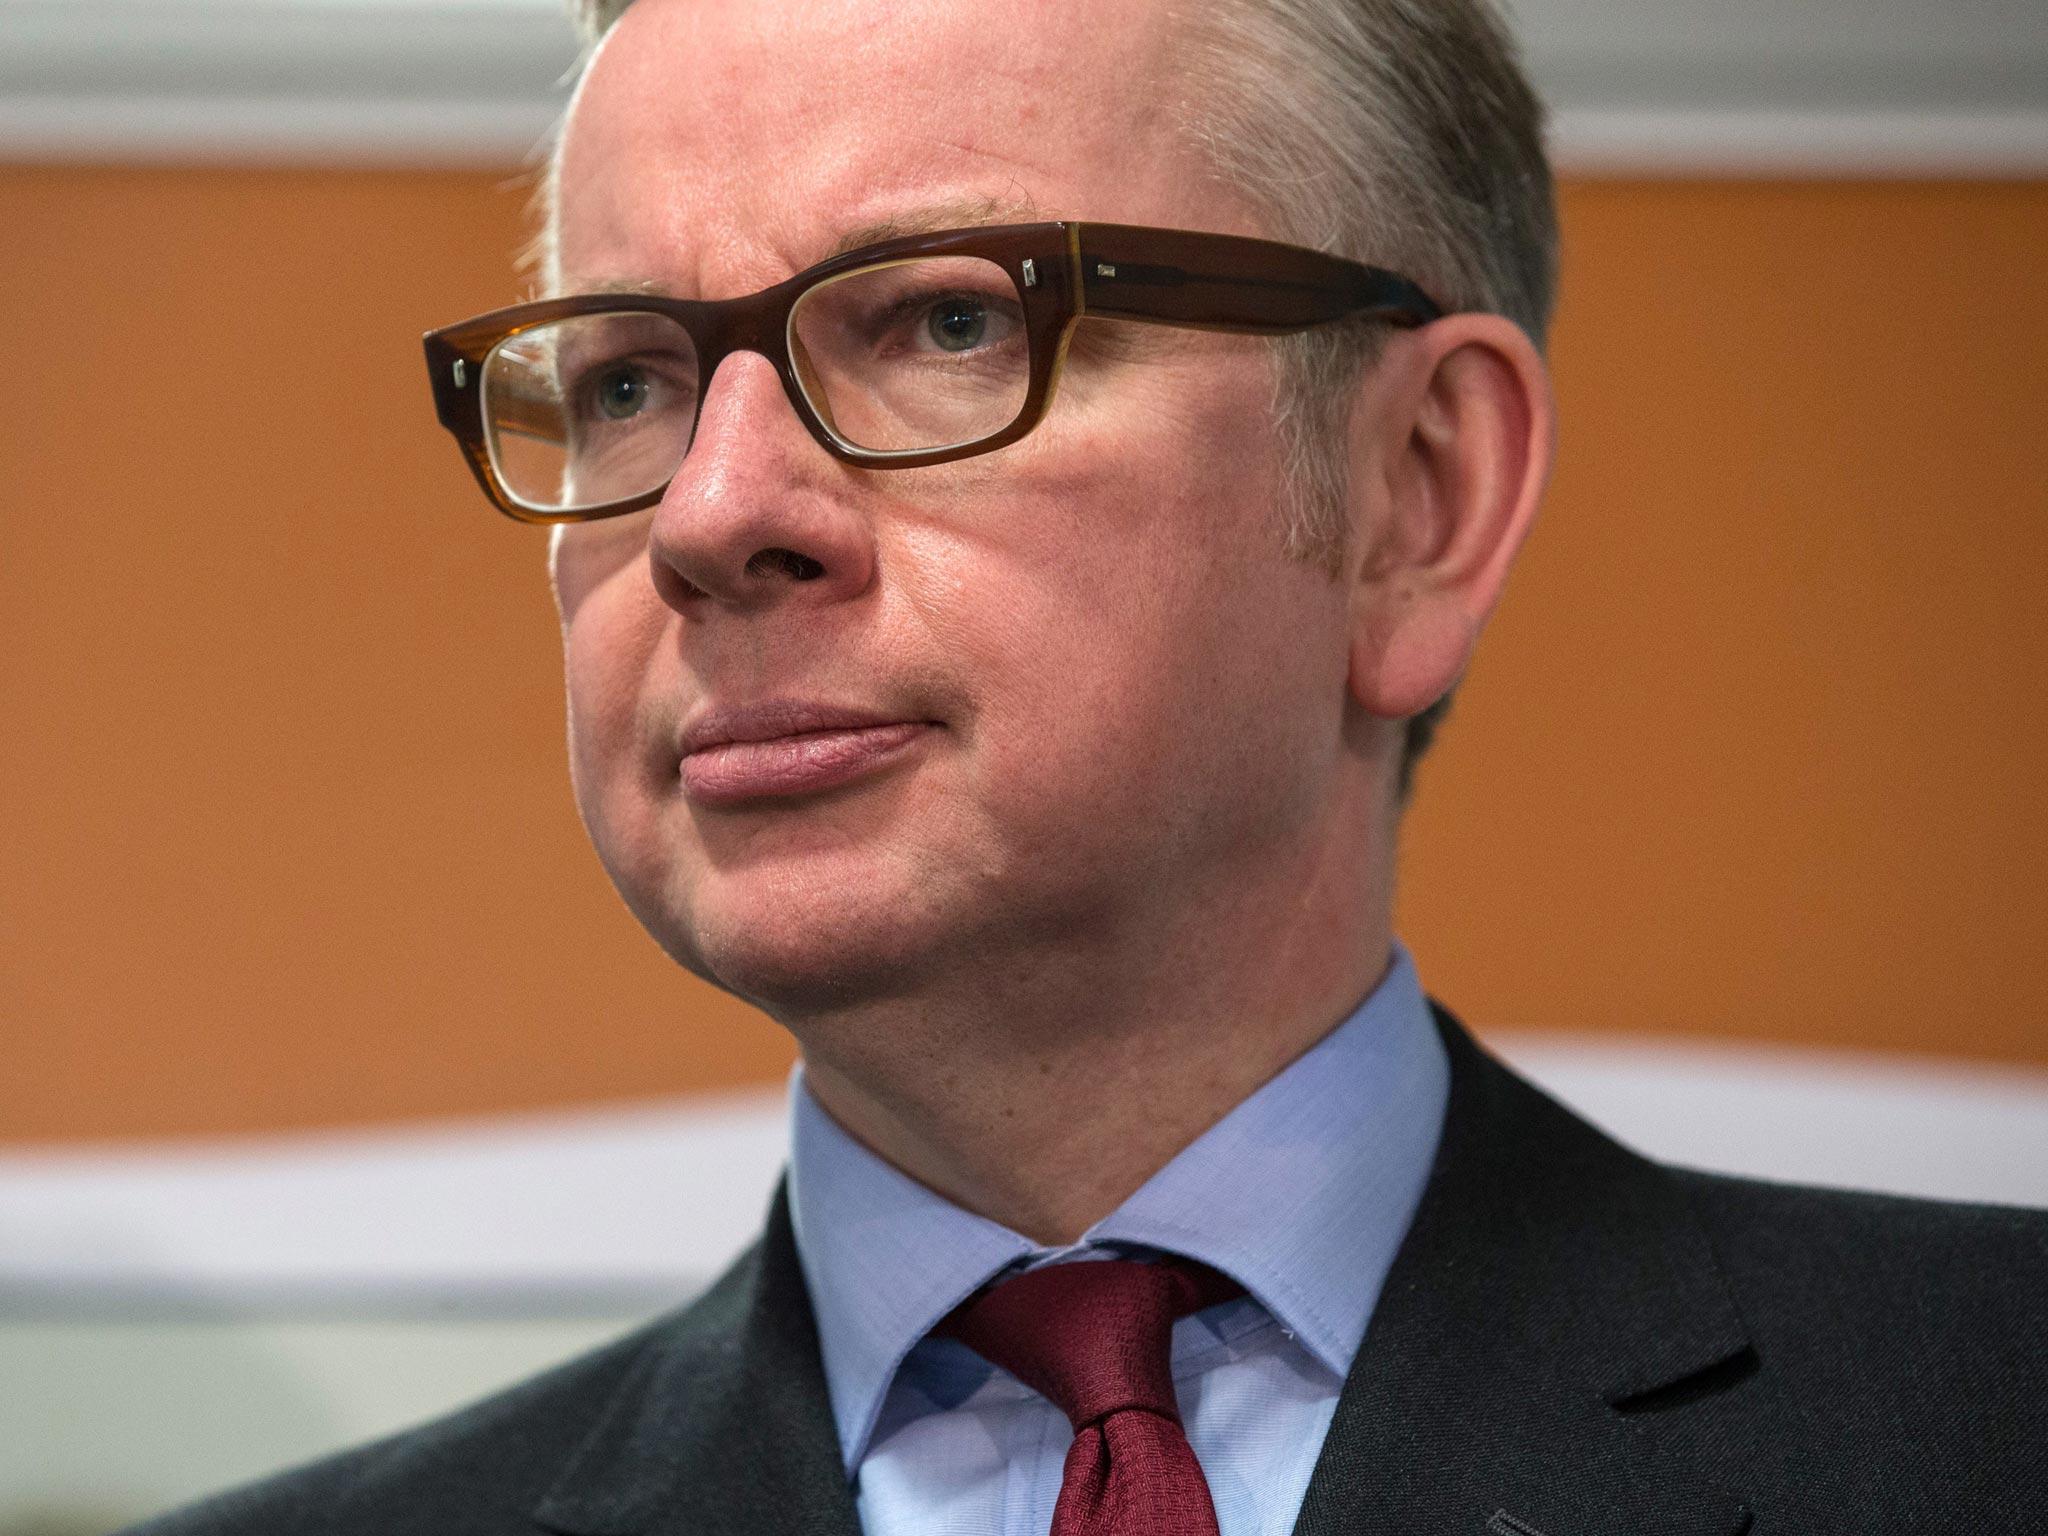 Justice Secretary Michael Gove said the people had ‘had enough‘ of experts during the EU referendum debate